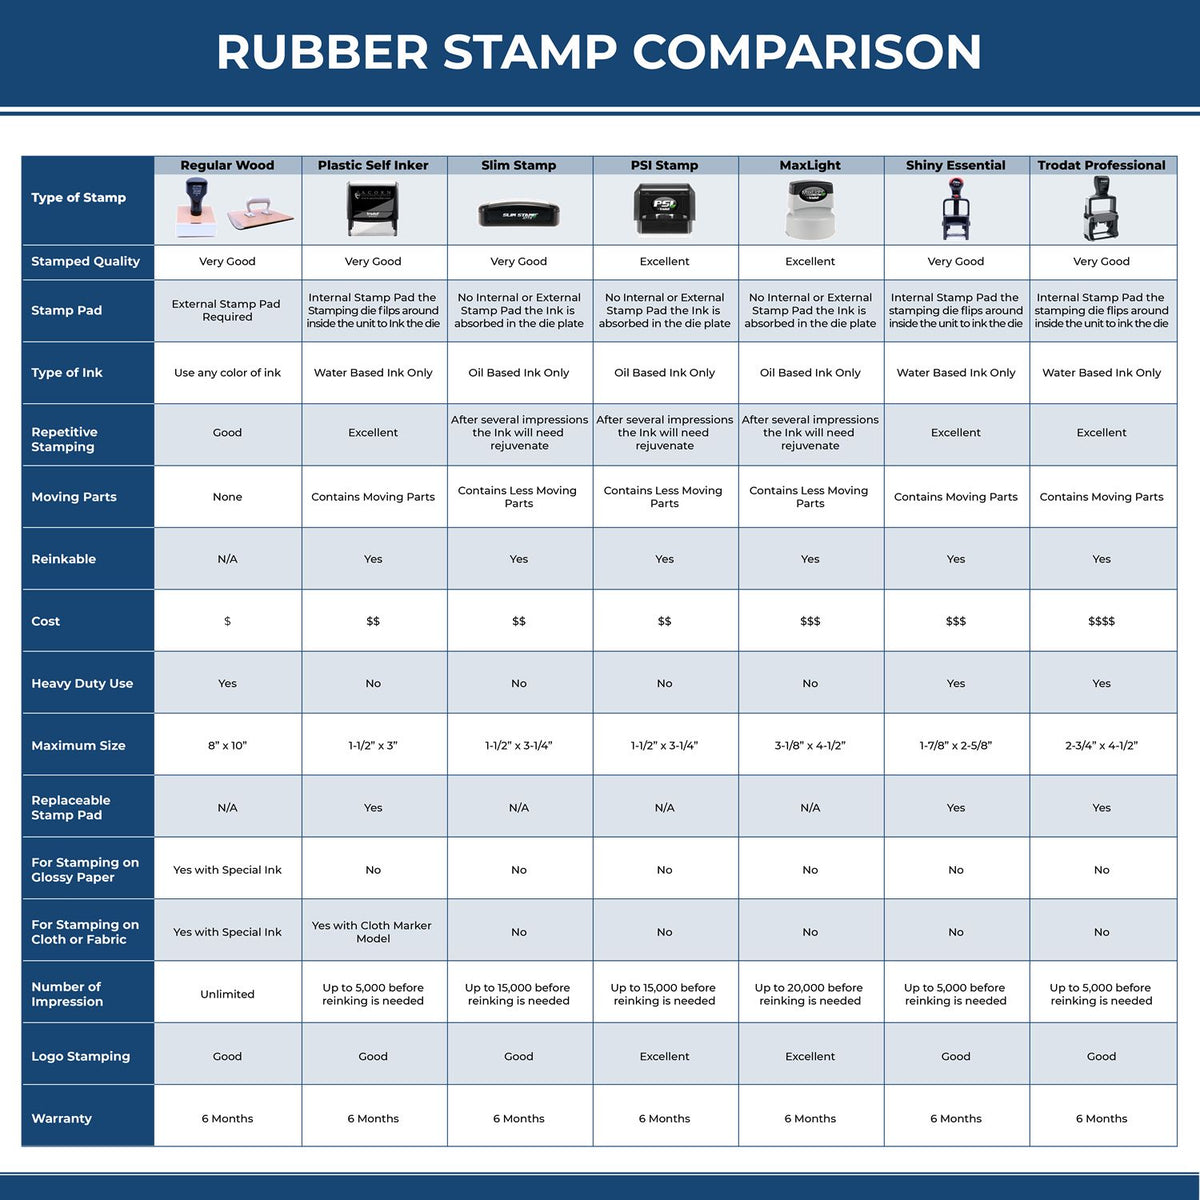 Large Self-Inking Special Services Stamp 5587S Rubber Stamp Comparison